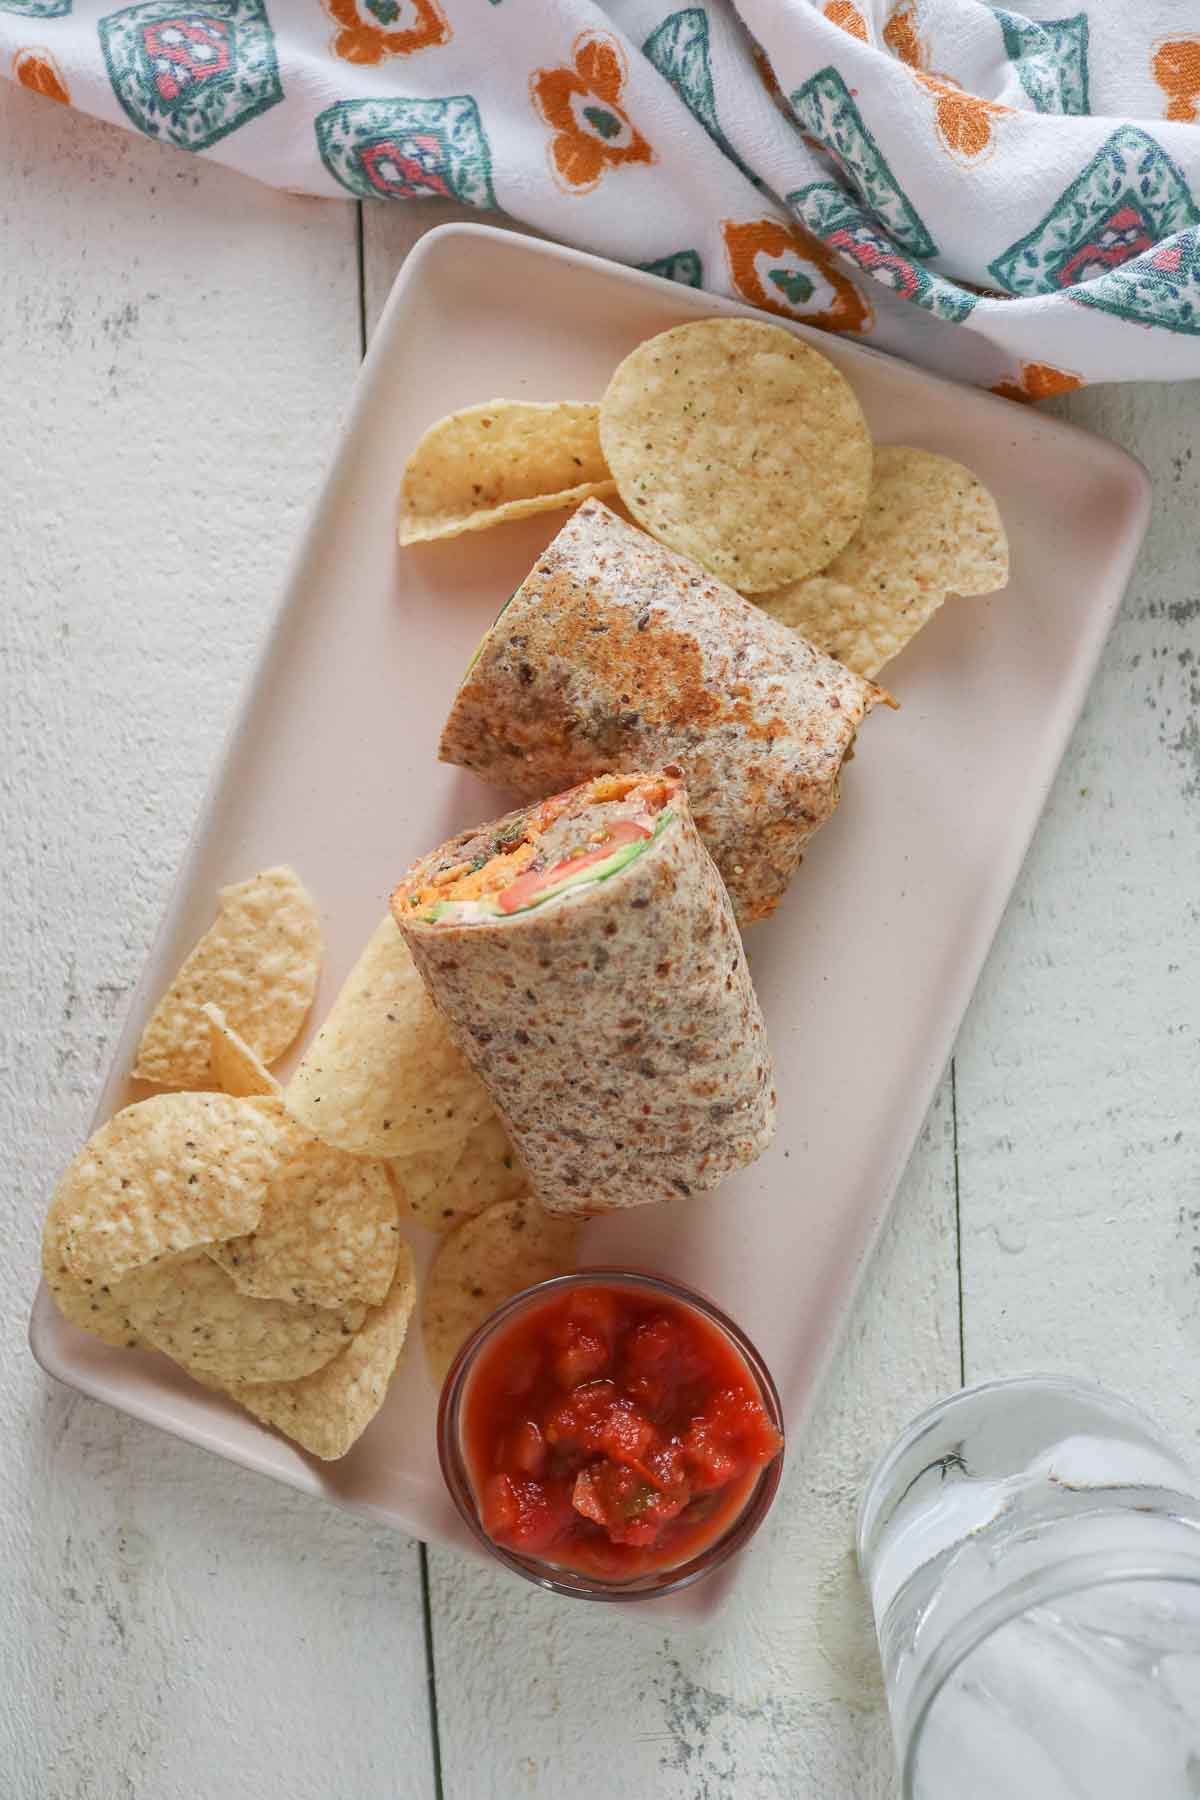 Overhead shot of two halves of a meatball wrap, tortilla chips and dish of salsa on a plate.